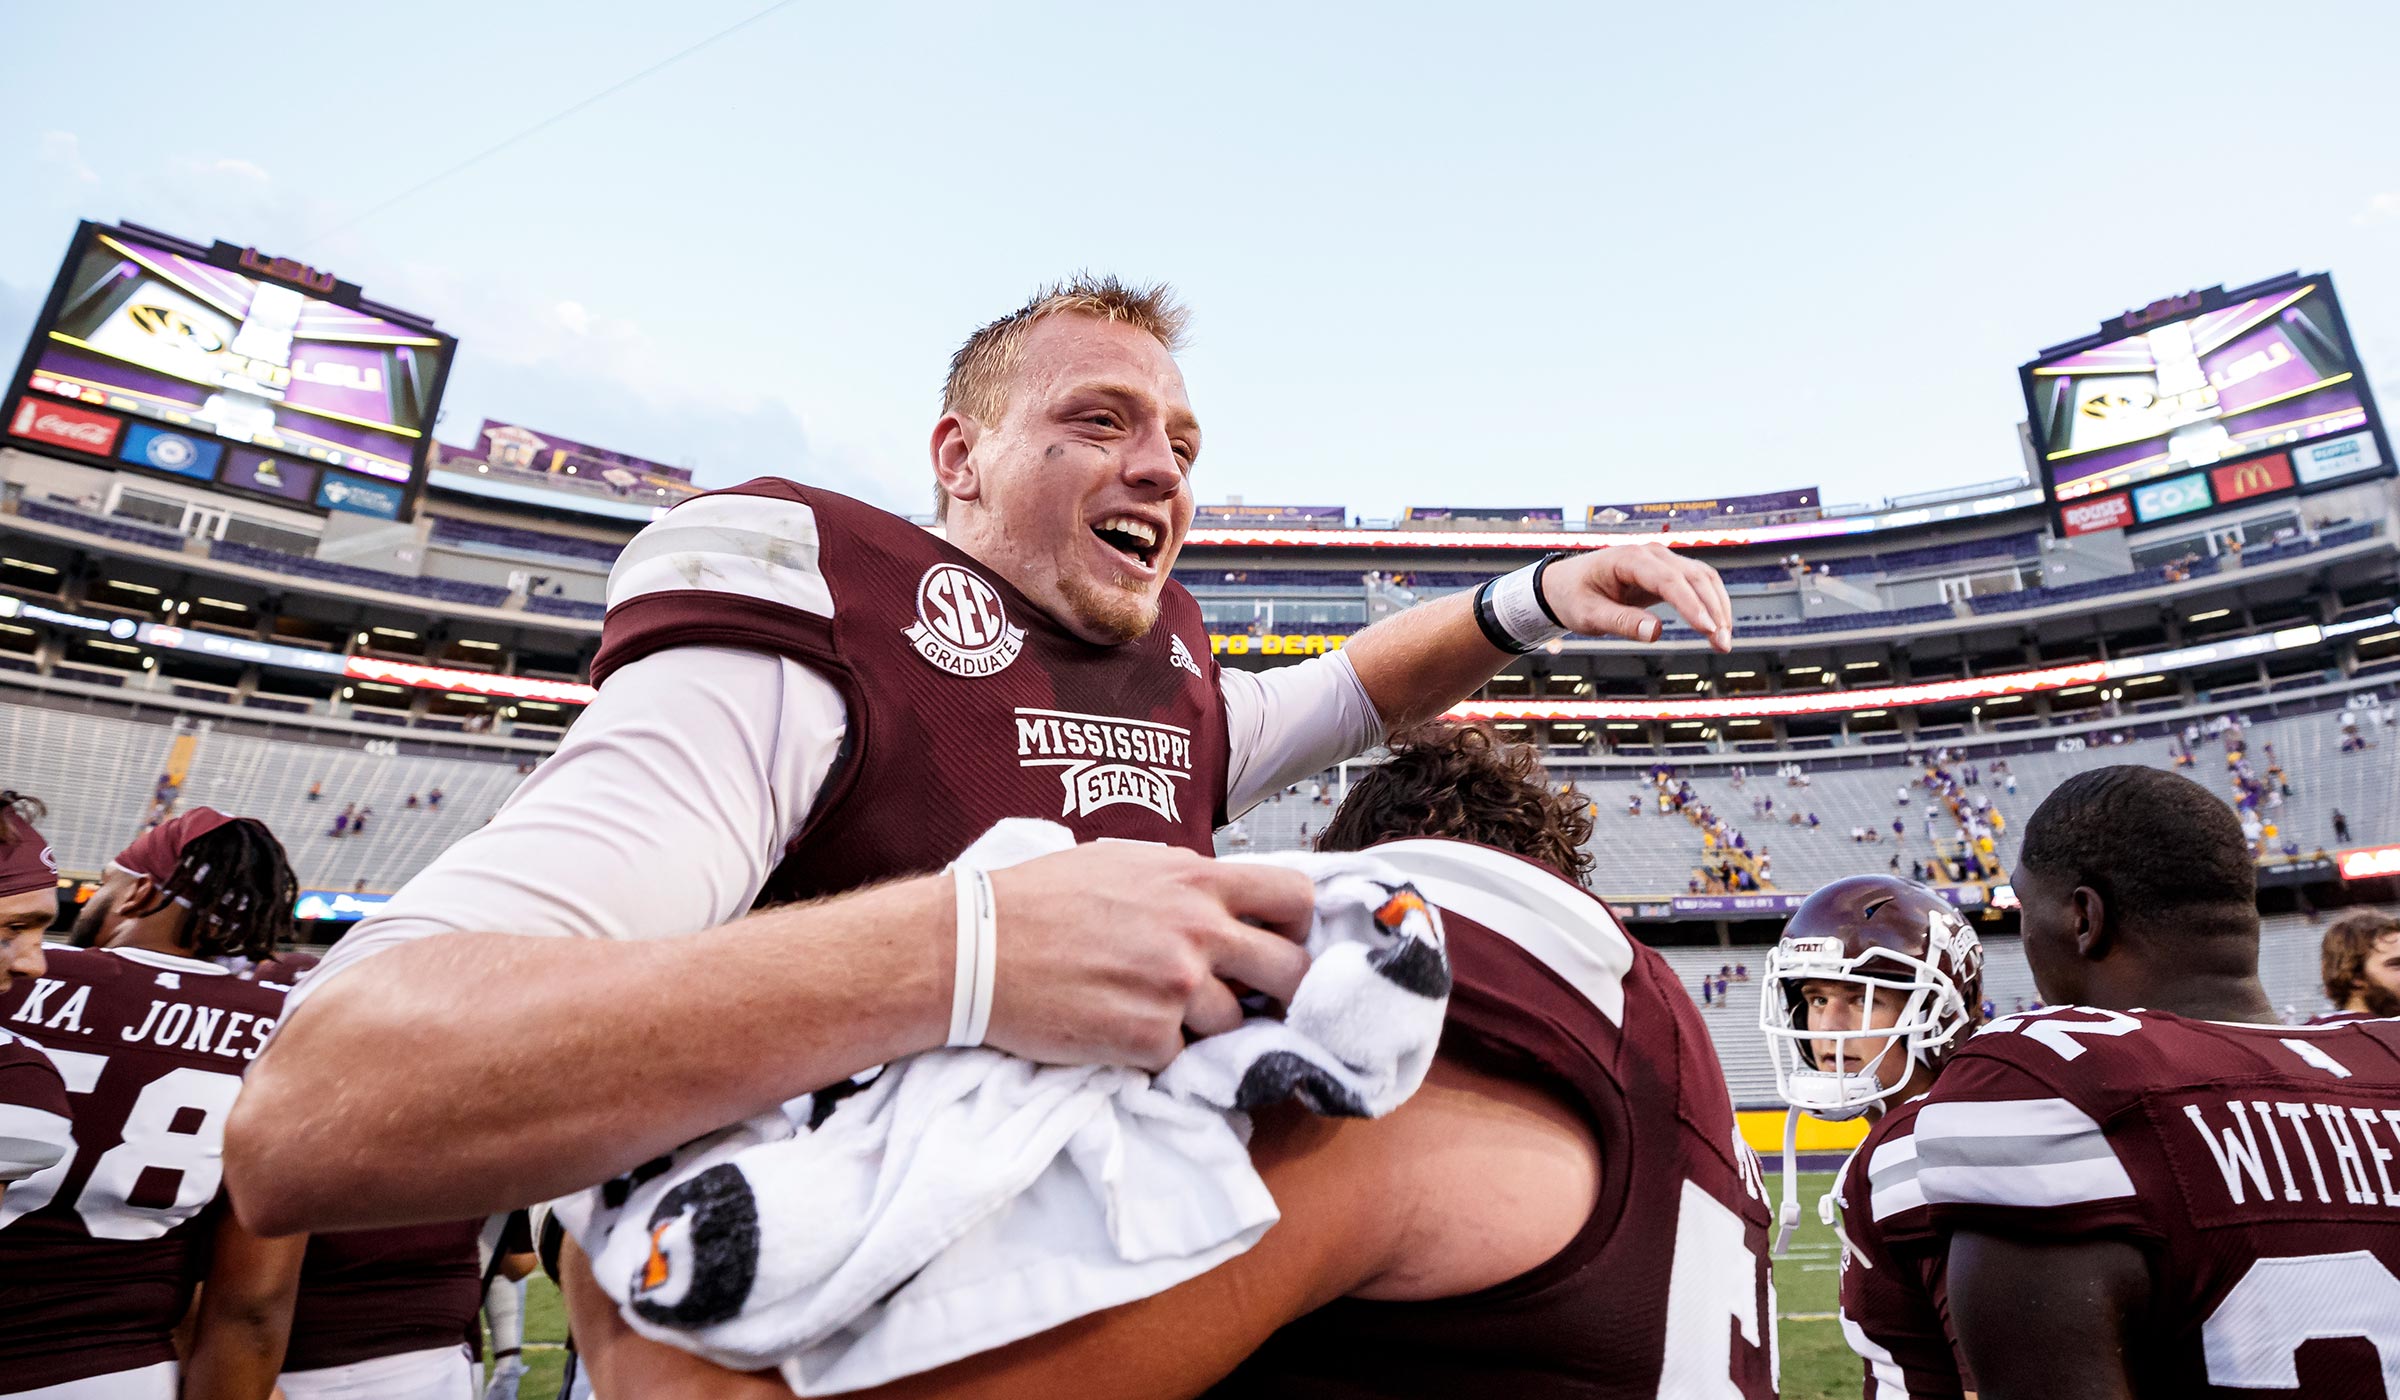 Football player in maroon jersey lifting another player in maroon jersey off ground in celebration 